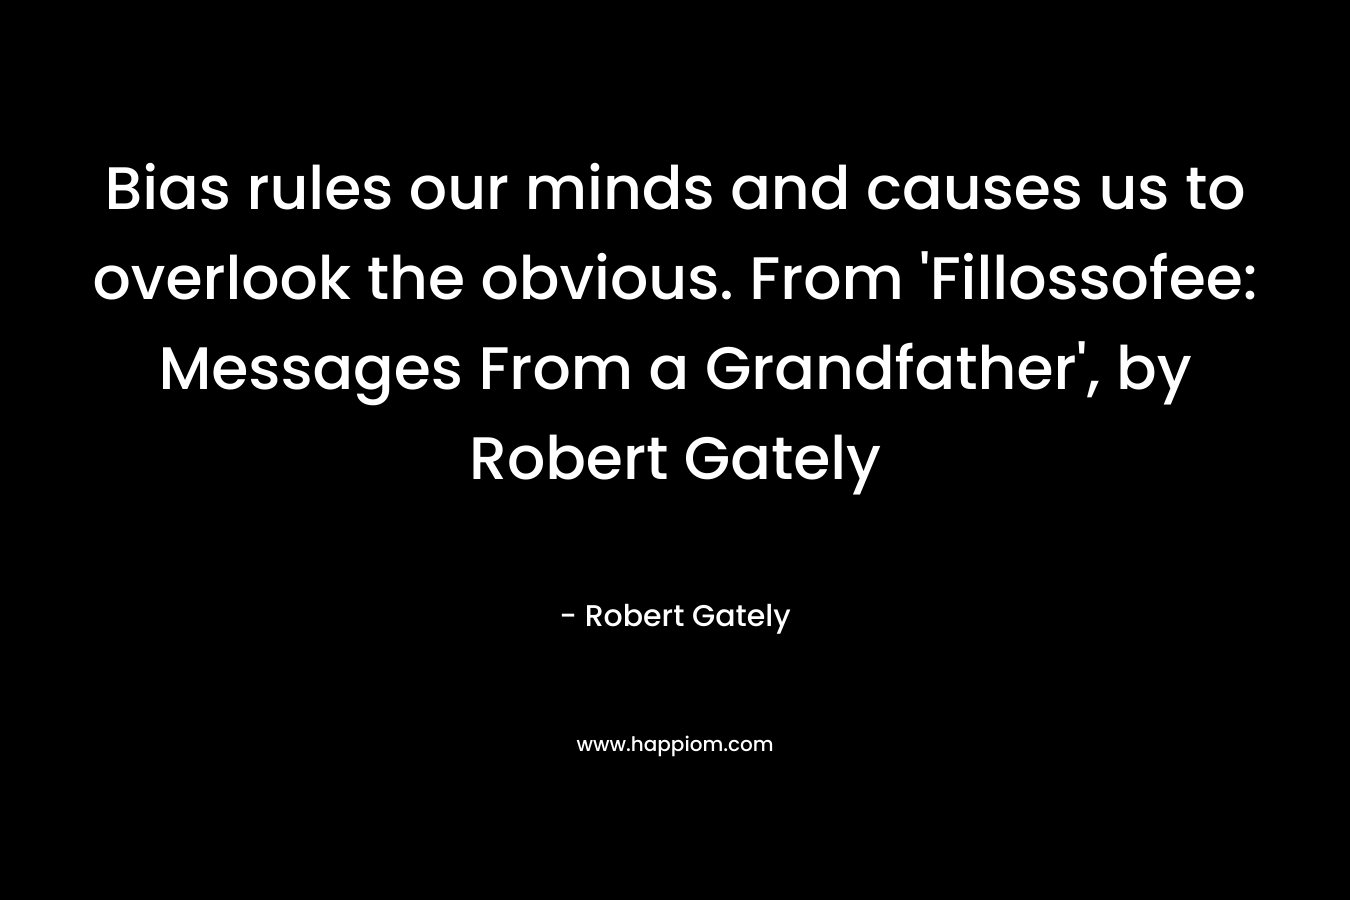 Bias rules our minds and causes us to overlook the obvious. From 'Fillossofee: Messages From a Grandfather', by Robert Gately